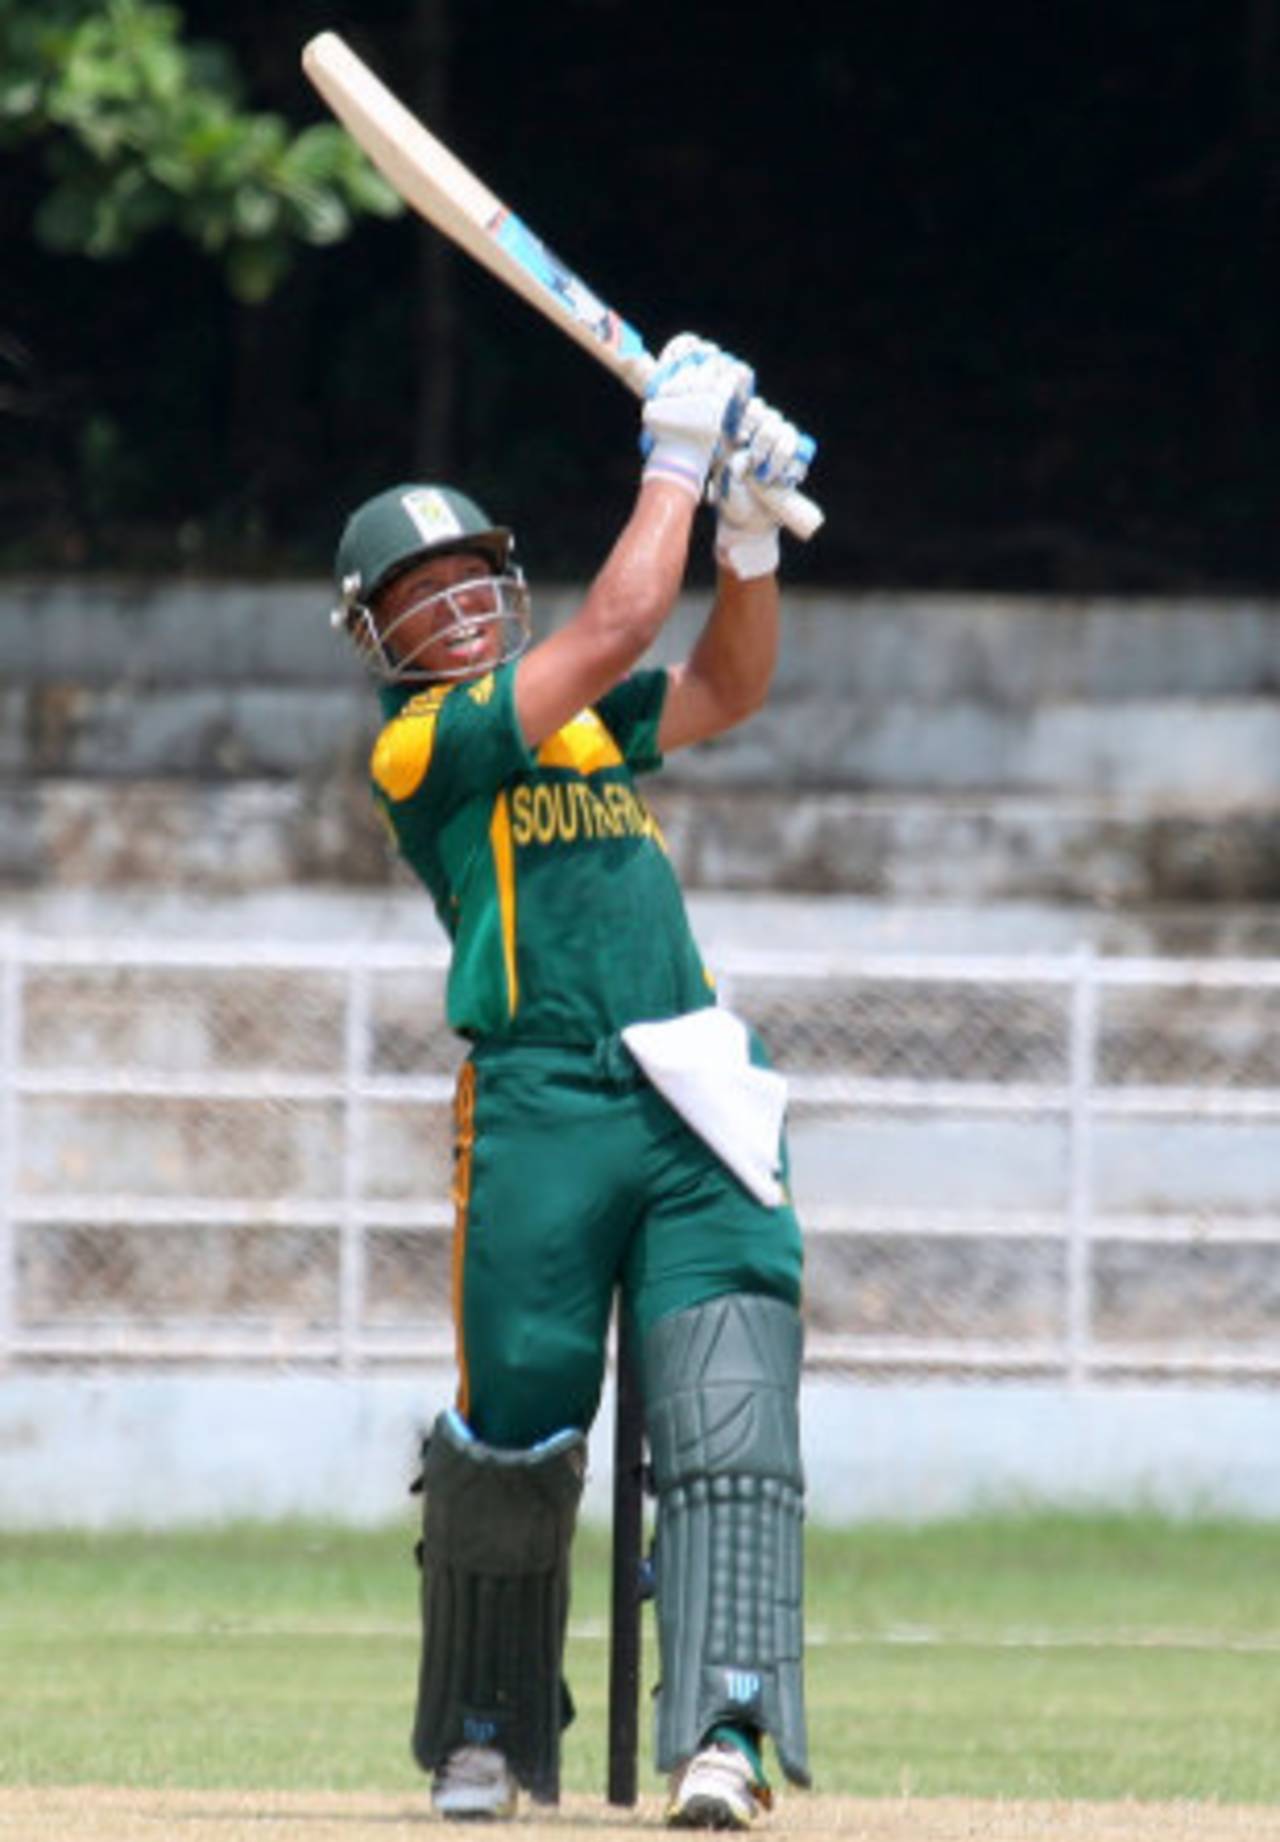 Clyde Fortuin smashed 54 to power South Africa home inside 13 overs&nbsp;&nbsp;&bull;&nbsp;&nbsp;BCCI